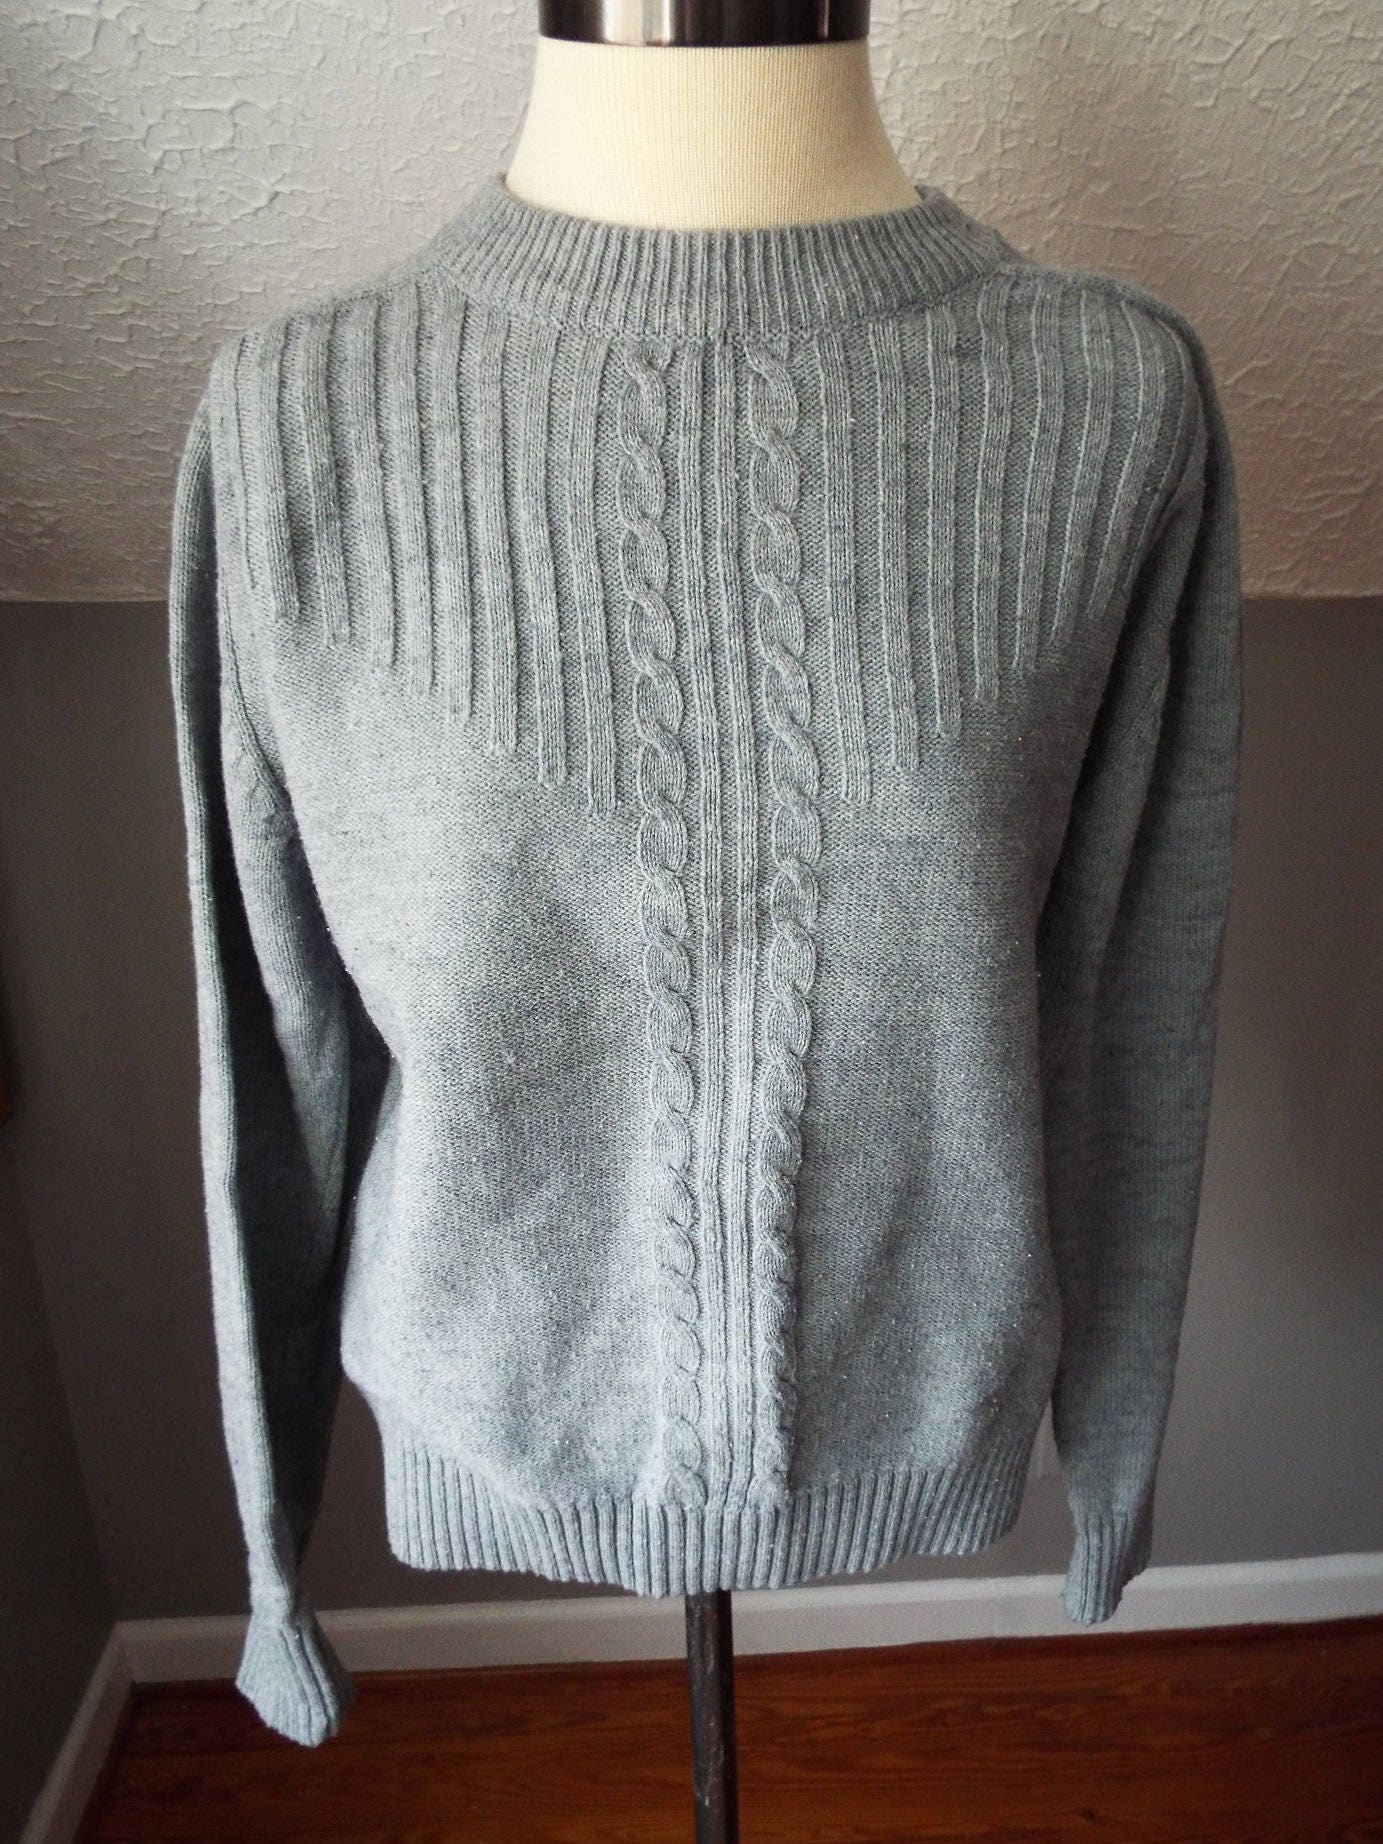 Vintage Mens Long Sleeve Sweater by National Shirt Shops